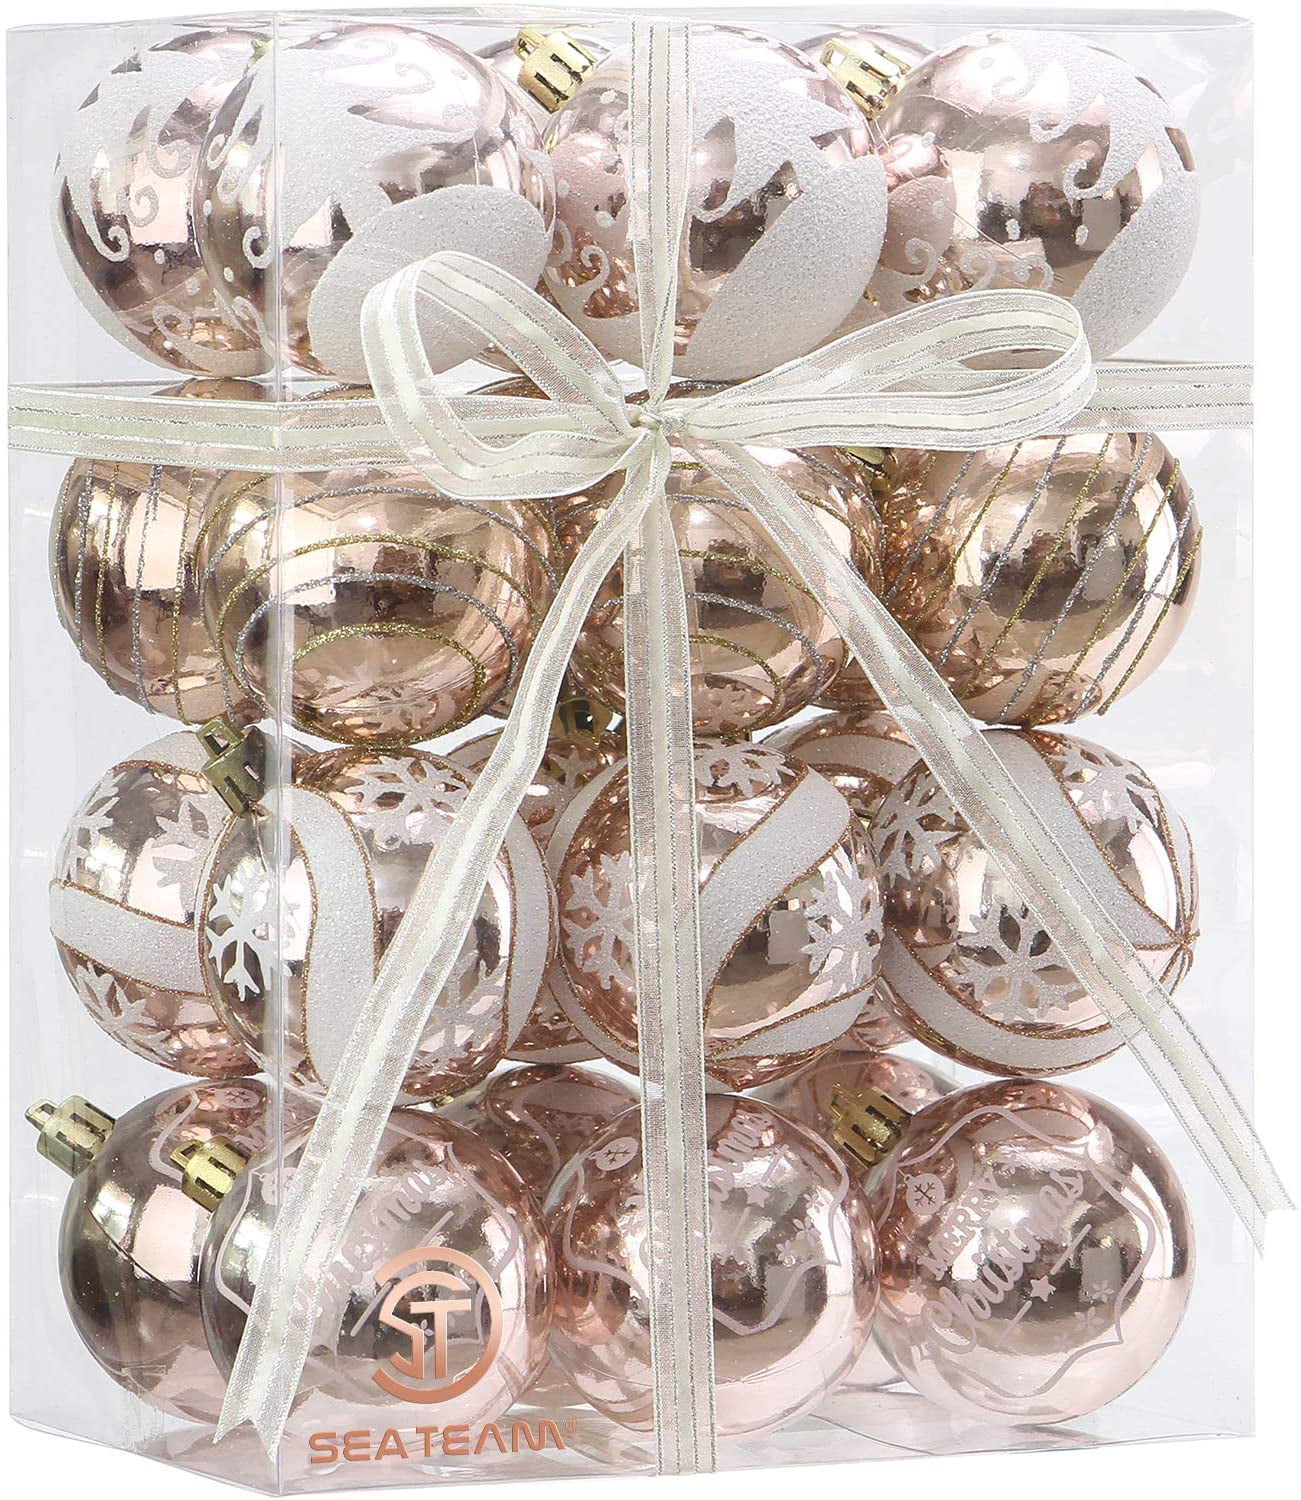 Rose Gold Sea Team 80mm/3.15 Delicate Painting & Glittering Shatterproof Christmas Ball Ornaments Decorative Hanging Christmas Ornaments Baubles Set for Xmas Tree 16 Counts